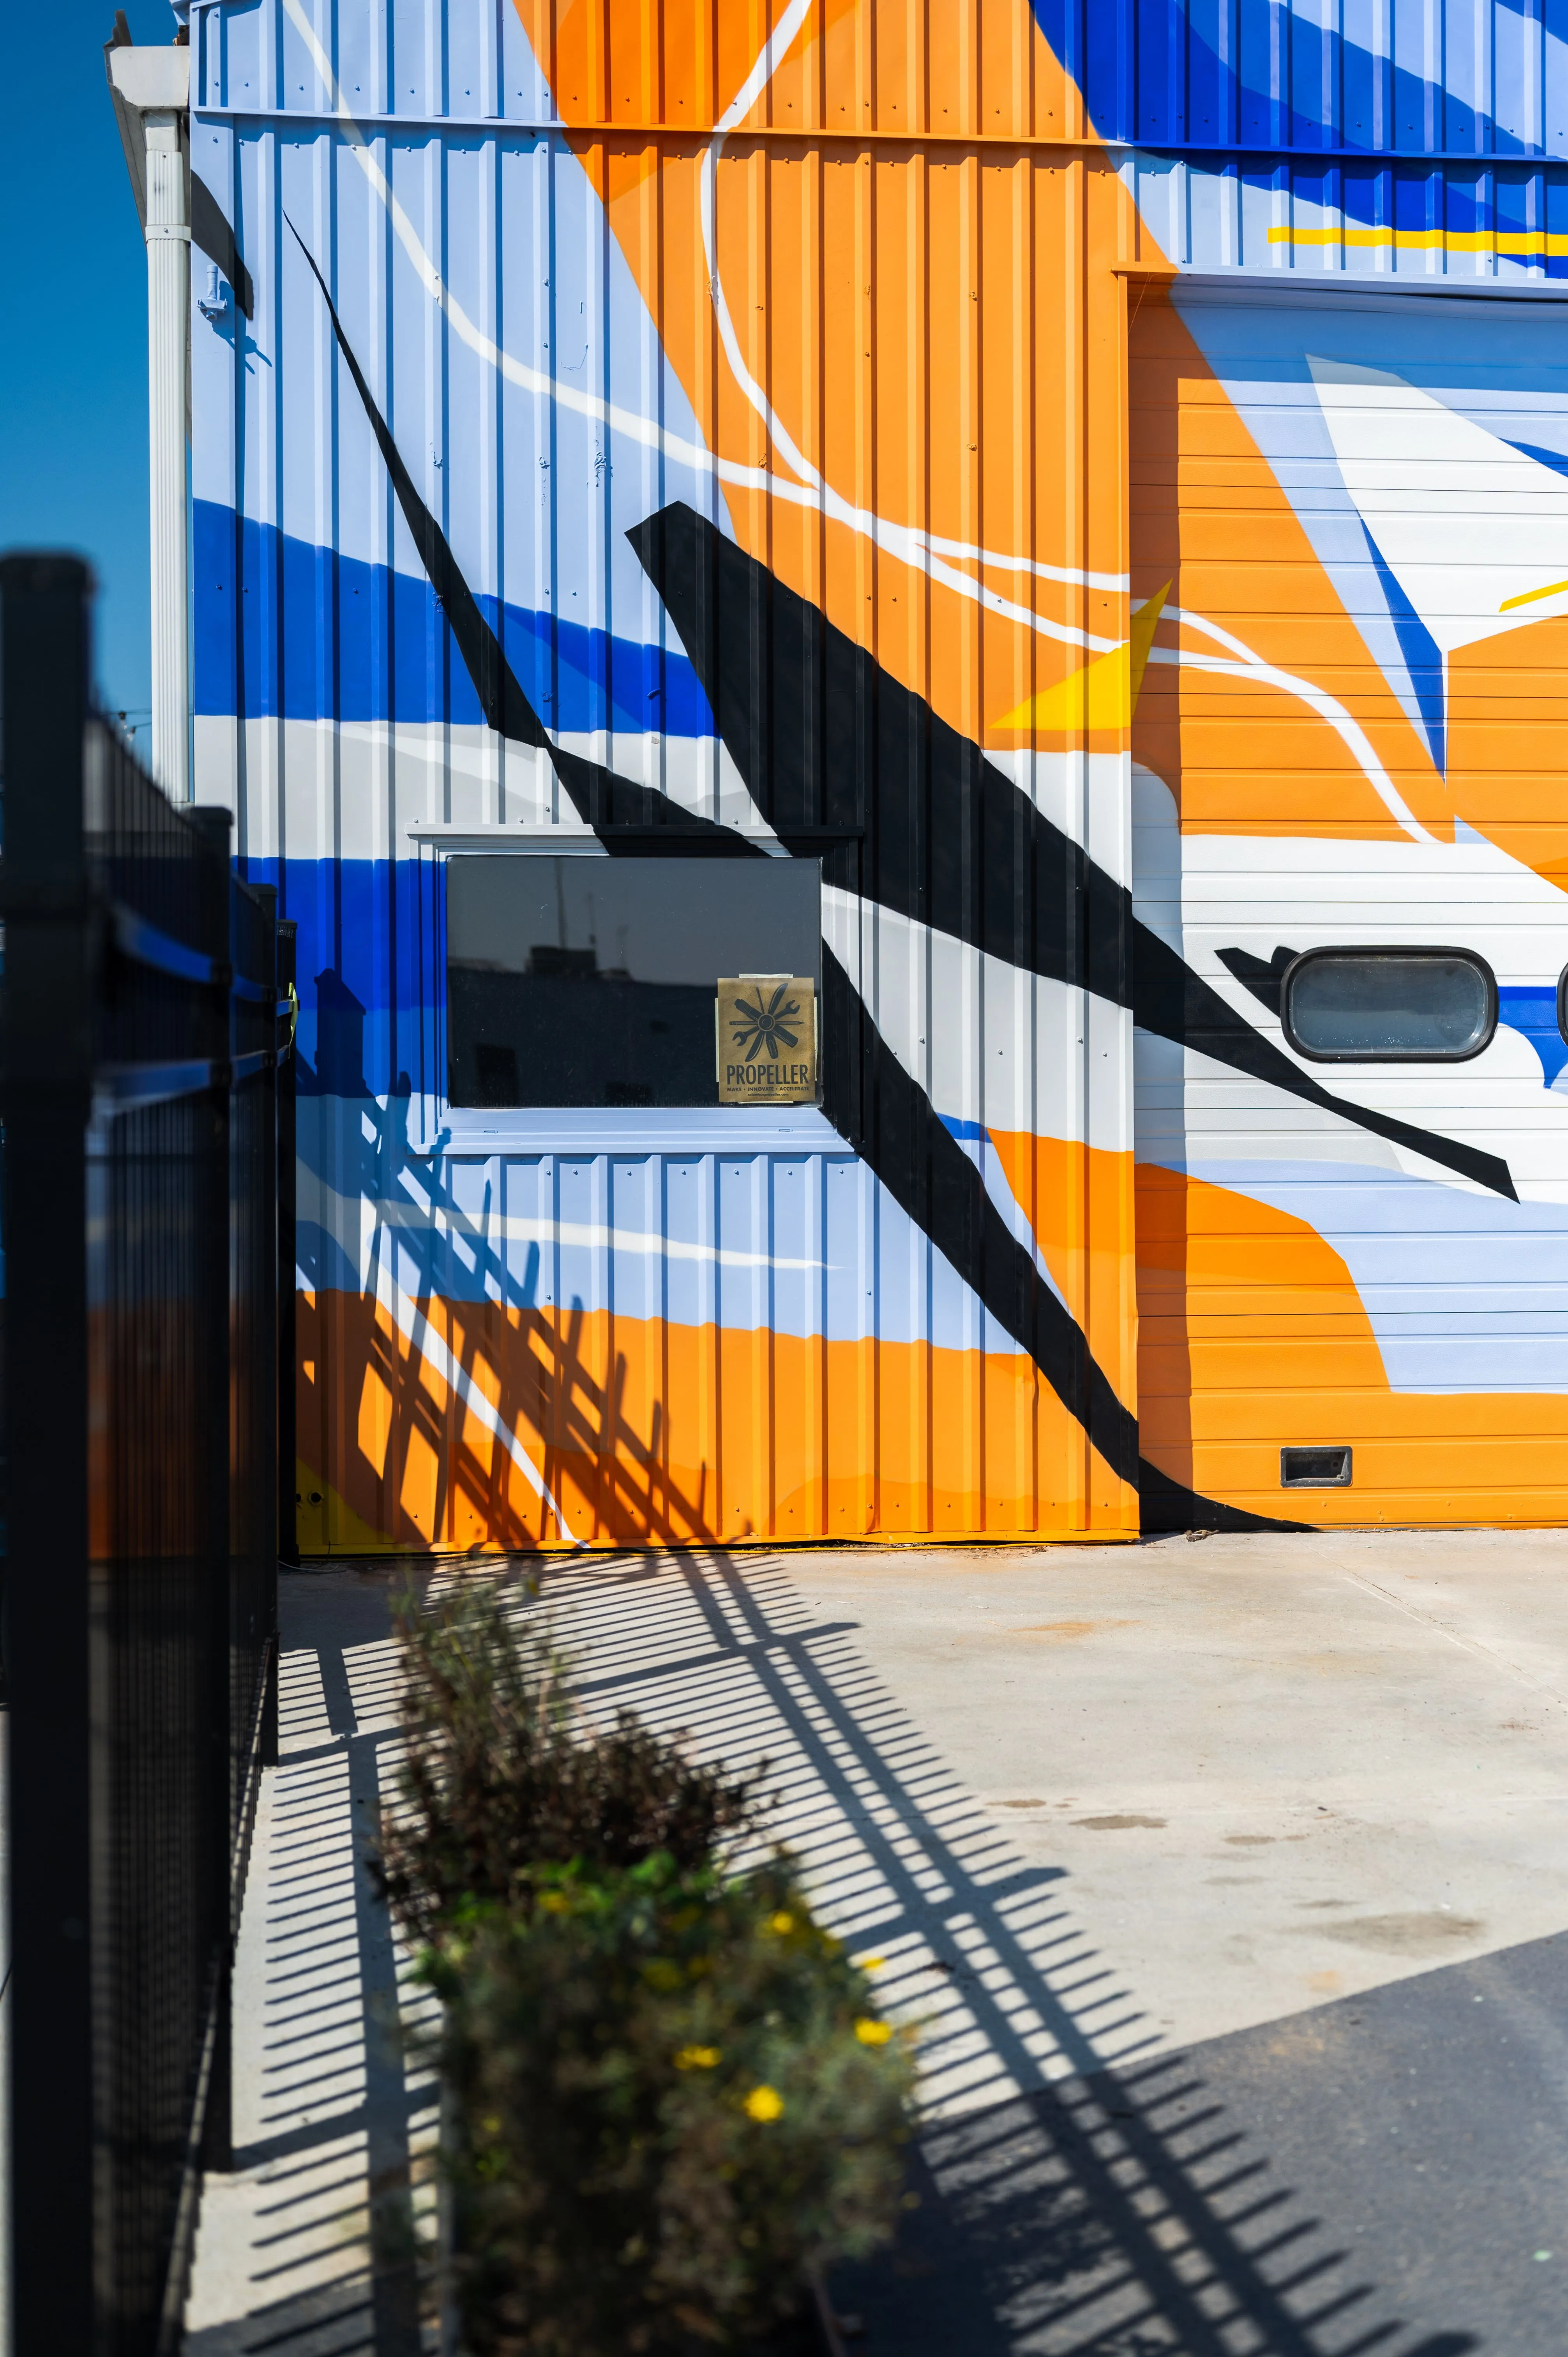 Colorfully painted shipping containers with a staircase shadow cast on the ground and a sign reading "PROPELLER".